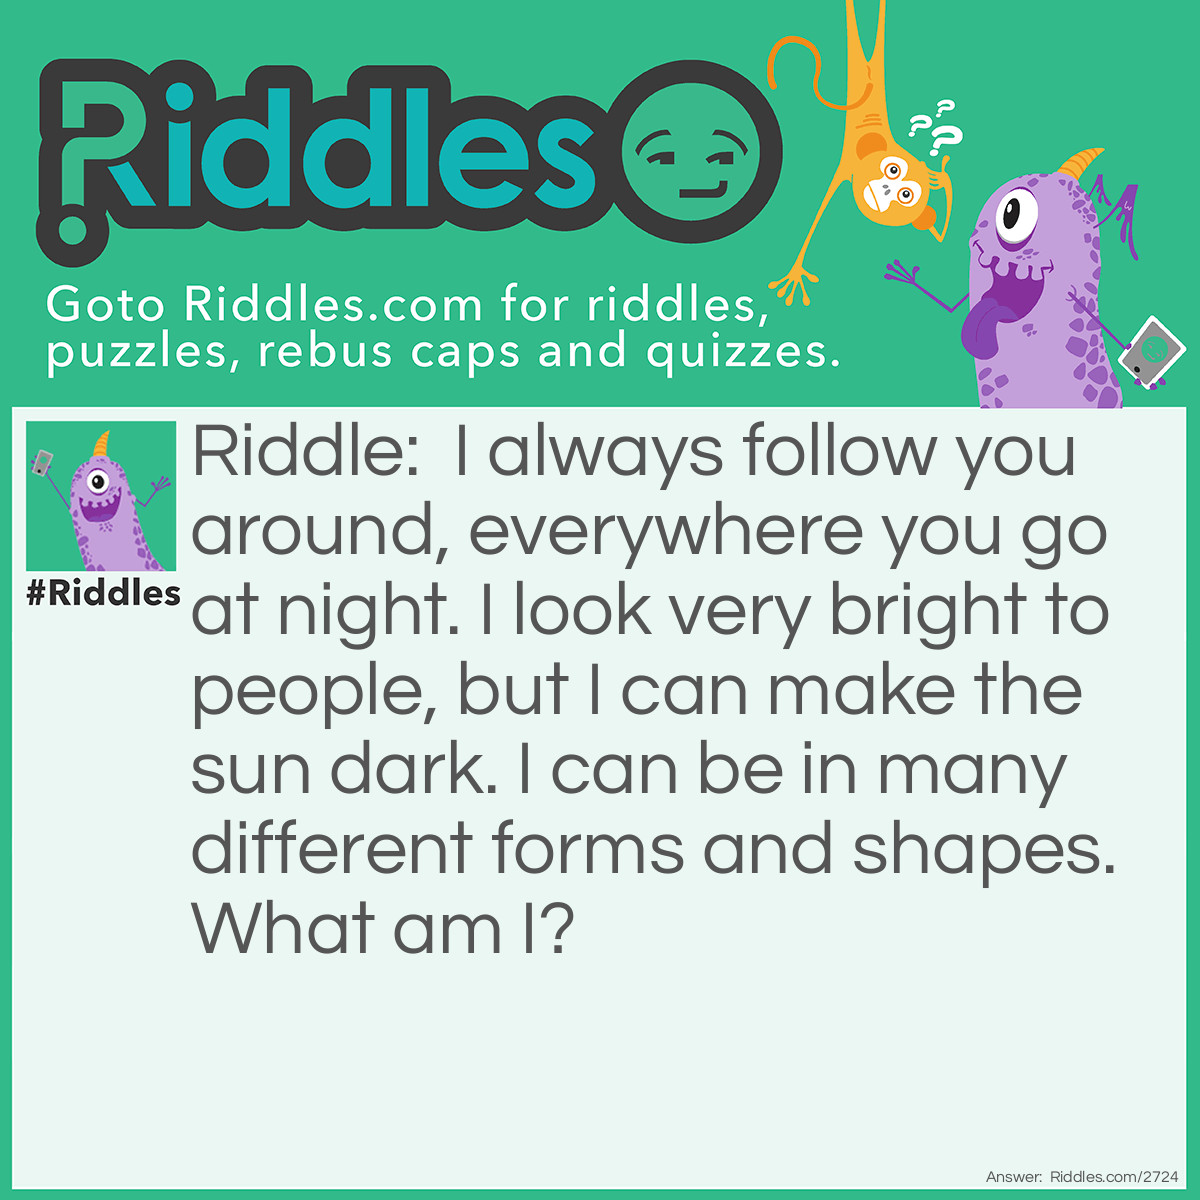 Riddle: I always follow you around, everywhere you go at night. I look very bright to people, but I can make the sun dark. I can be in many different forms and shapes. What am I? Answer: The moon!